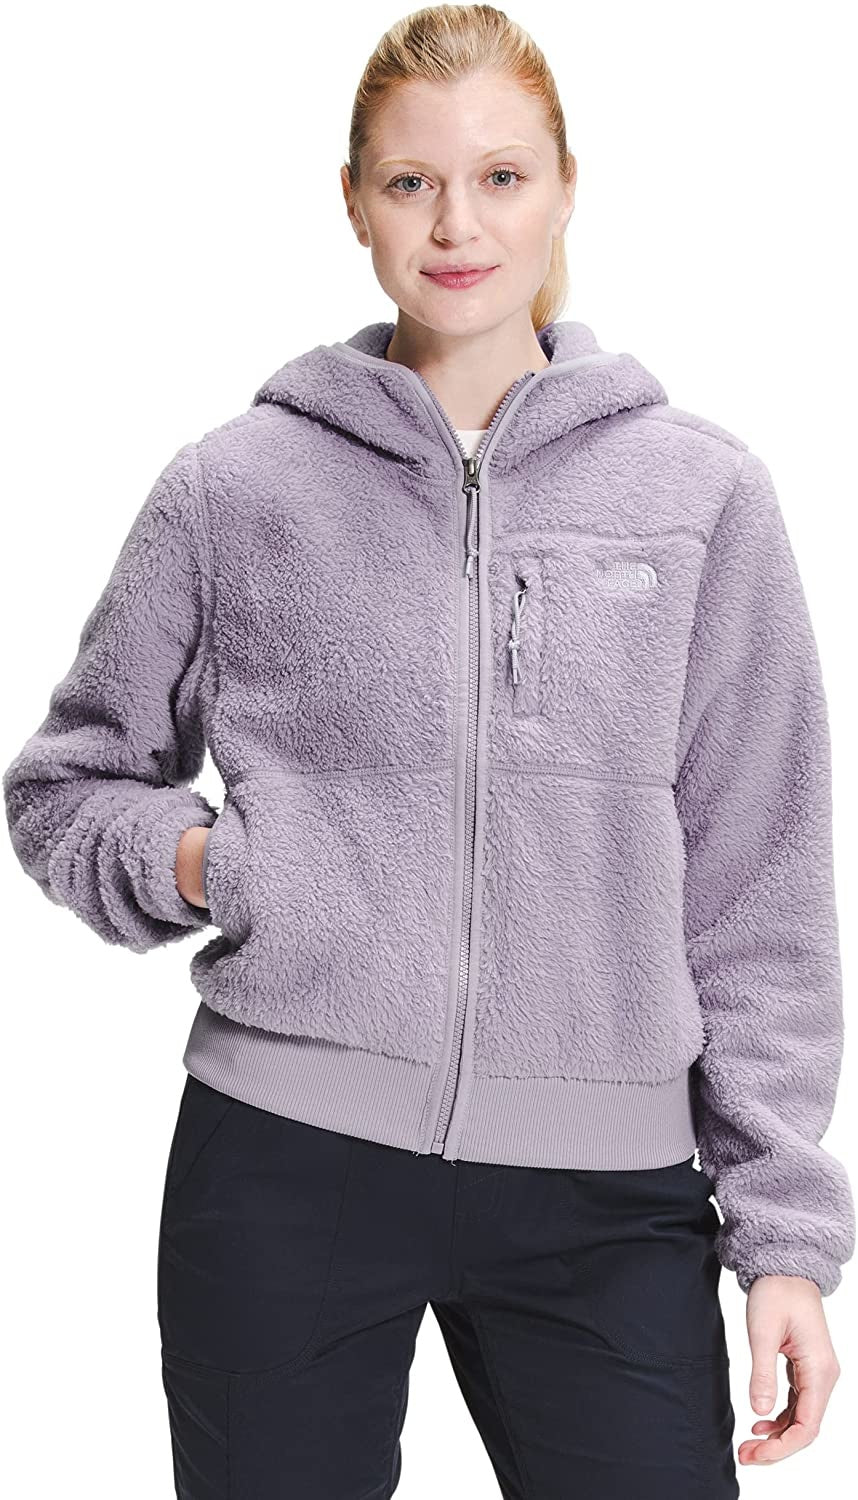 Women's Dunraven Full Zip Hoodie Village Ski Hut The North Face Winter, Womens, Womens Jackets & Vests